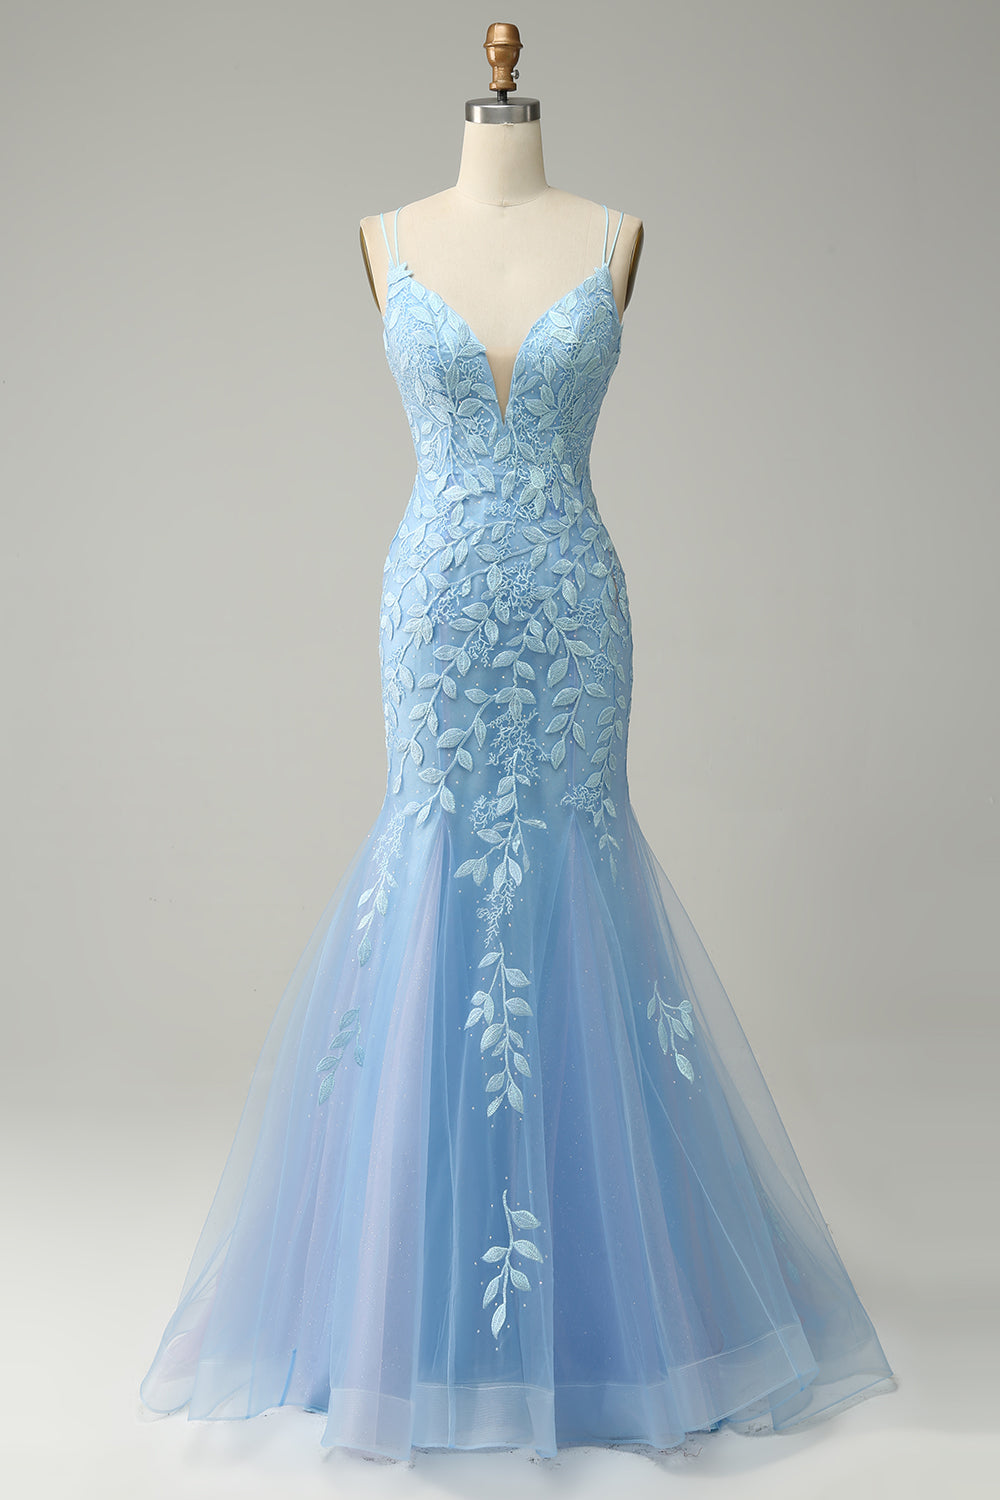 Spaghetti Straps Mermaid Blue Long Formal Dress With Appliques